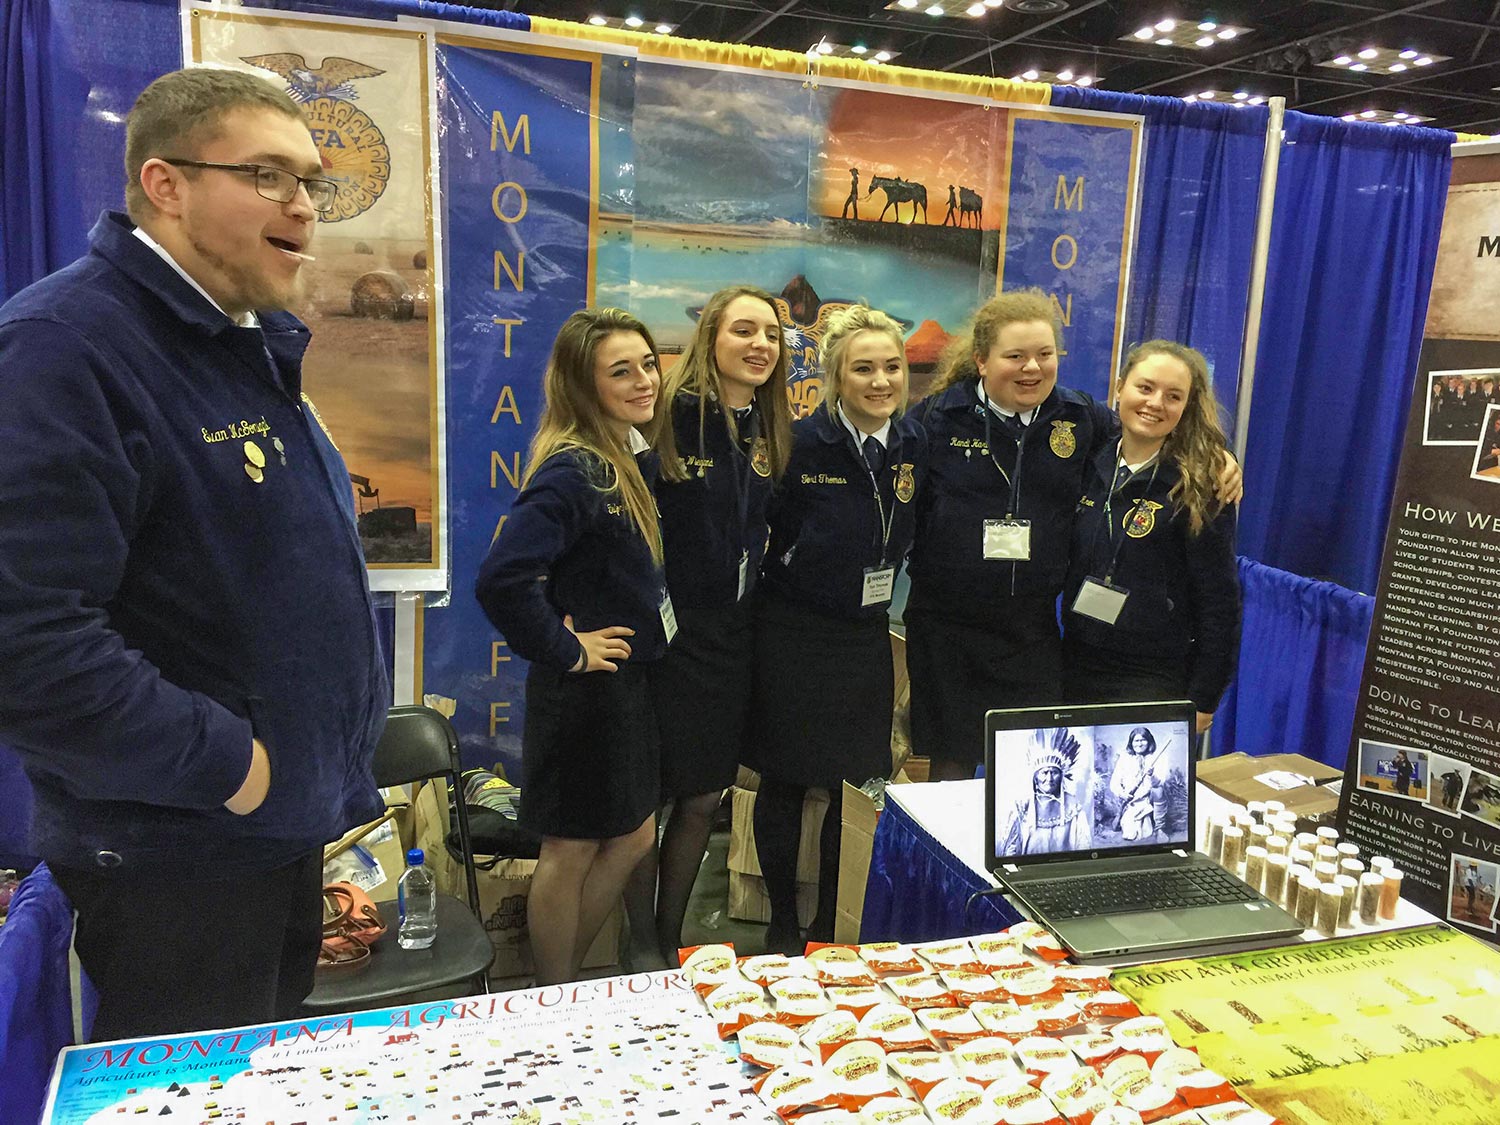 Members of the Montana FFA delegation pose in front of my photos at their booth at the National FFA Convention in Indianapolis, Indiana.